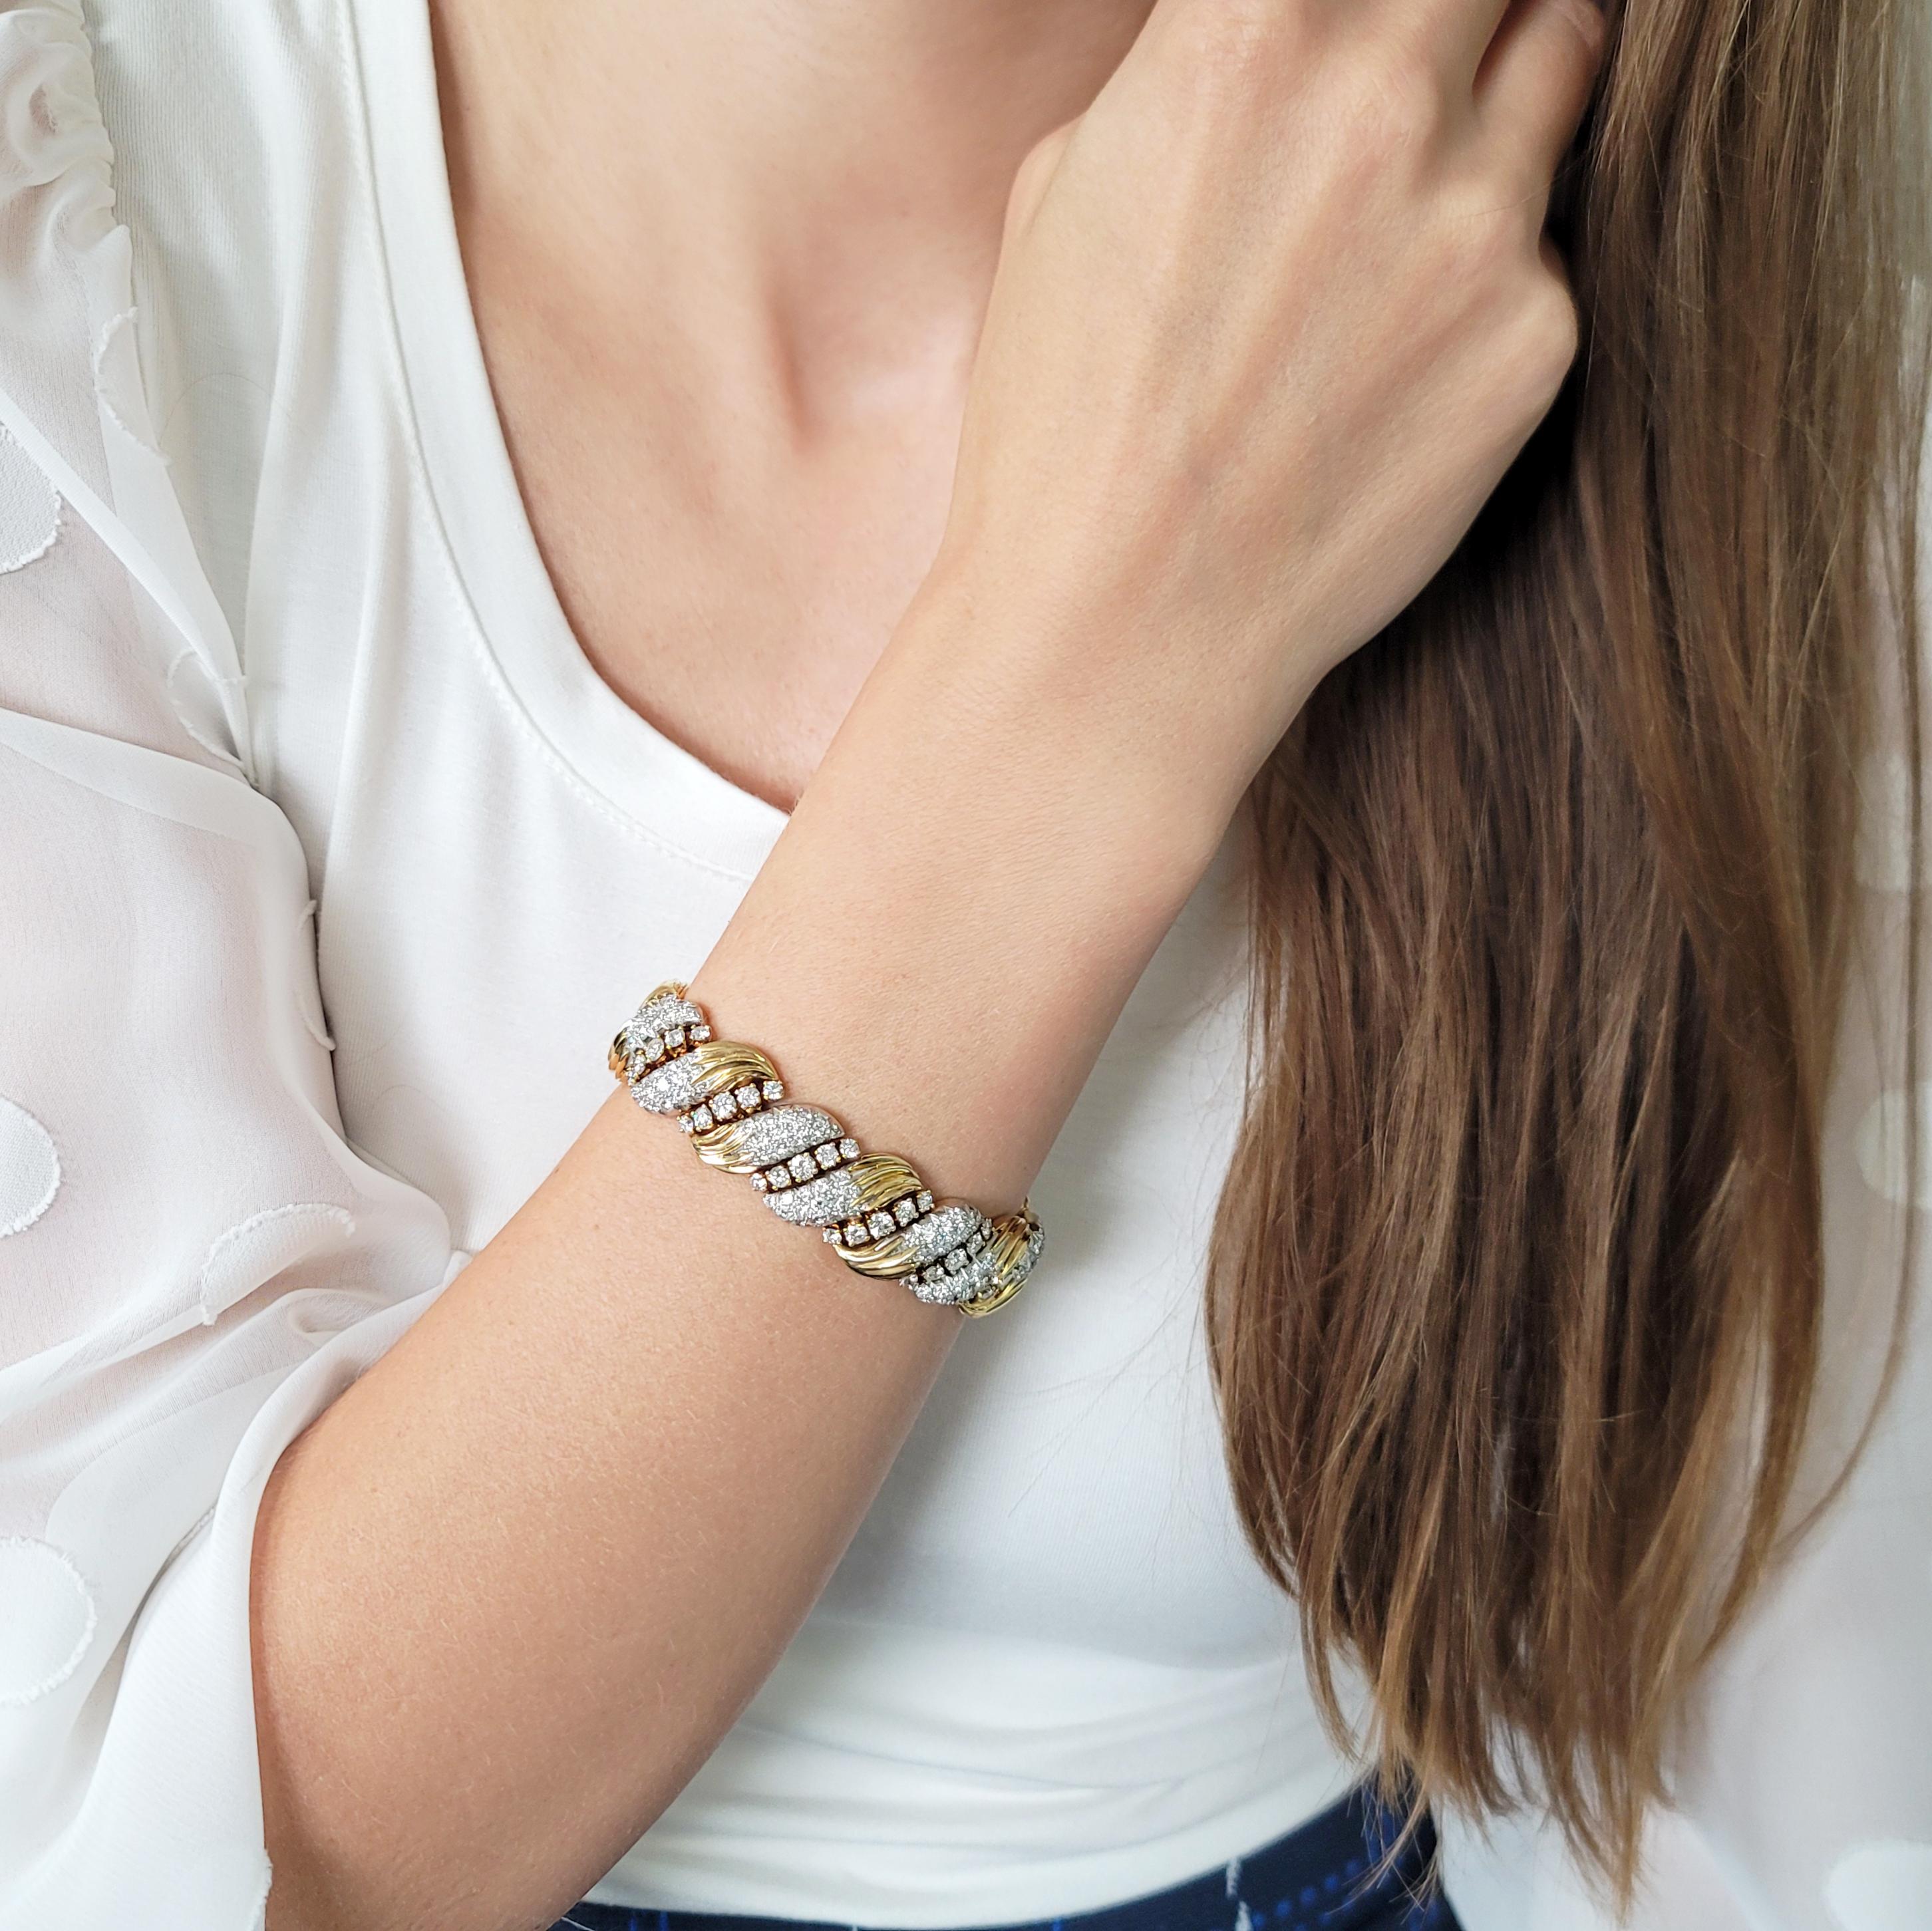 From Van Cleef & Arpels  'Heritage Collection'
diamond bracelet, designed as an alternating 14 links of
single row of 5 prong set round diamonds and 14 nature inspired yellow gold and platinum links, each
pave set with 14 round diamonds, secured